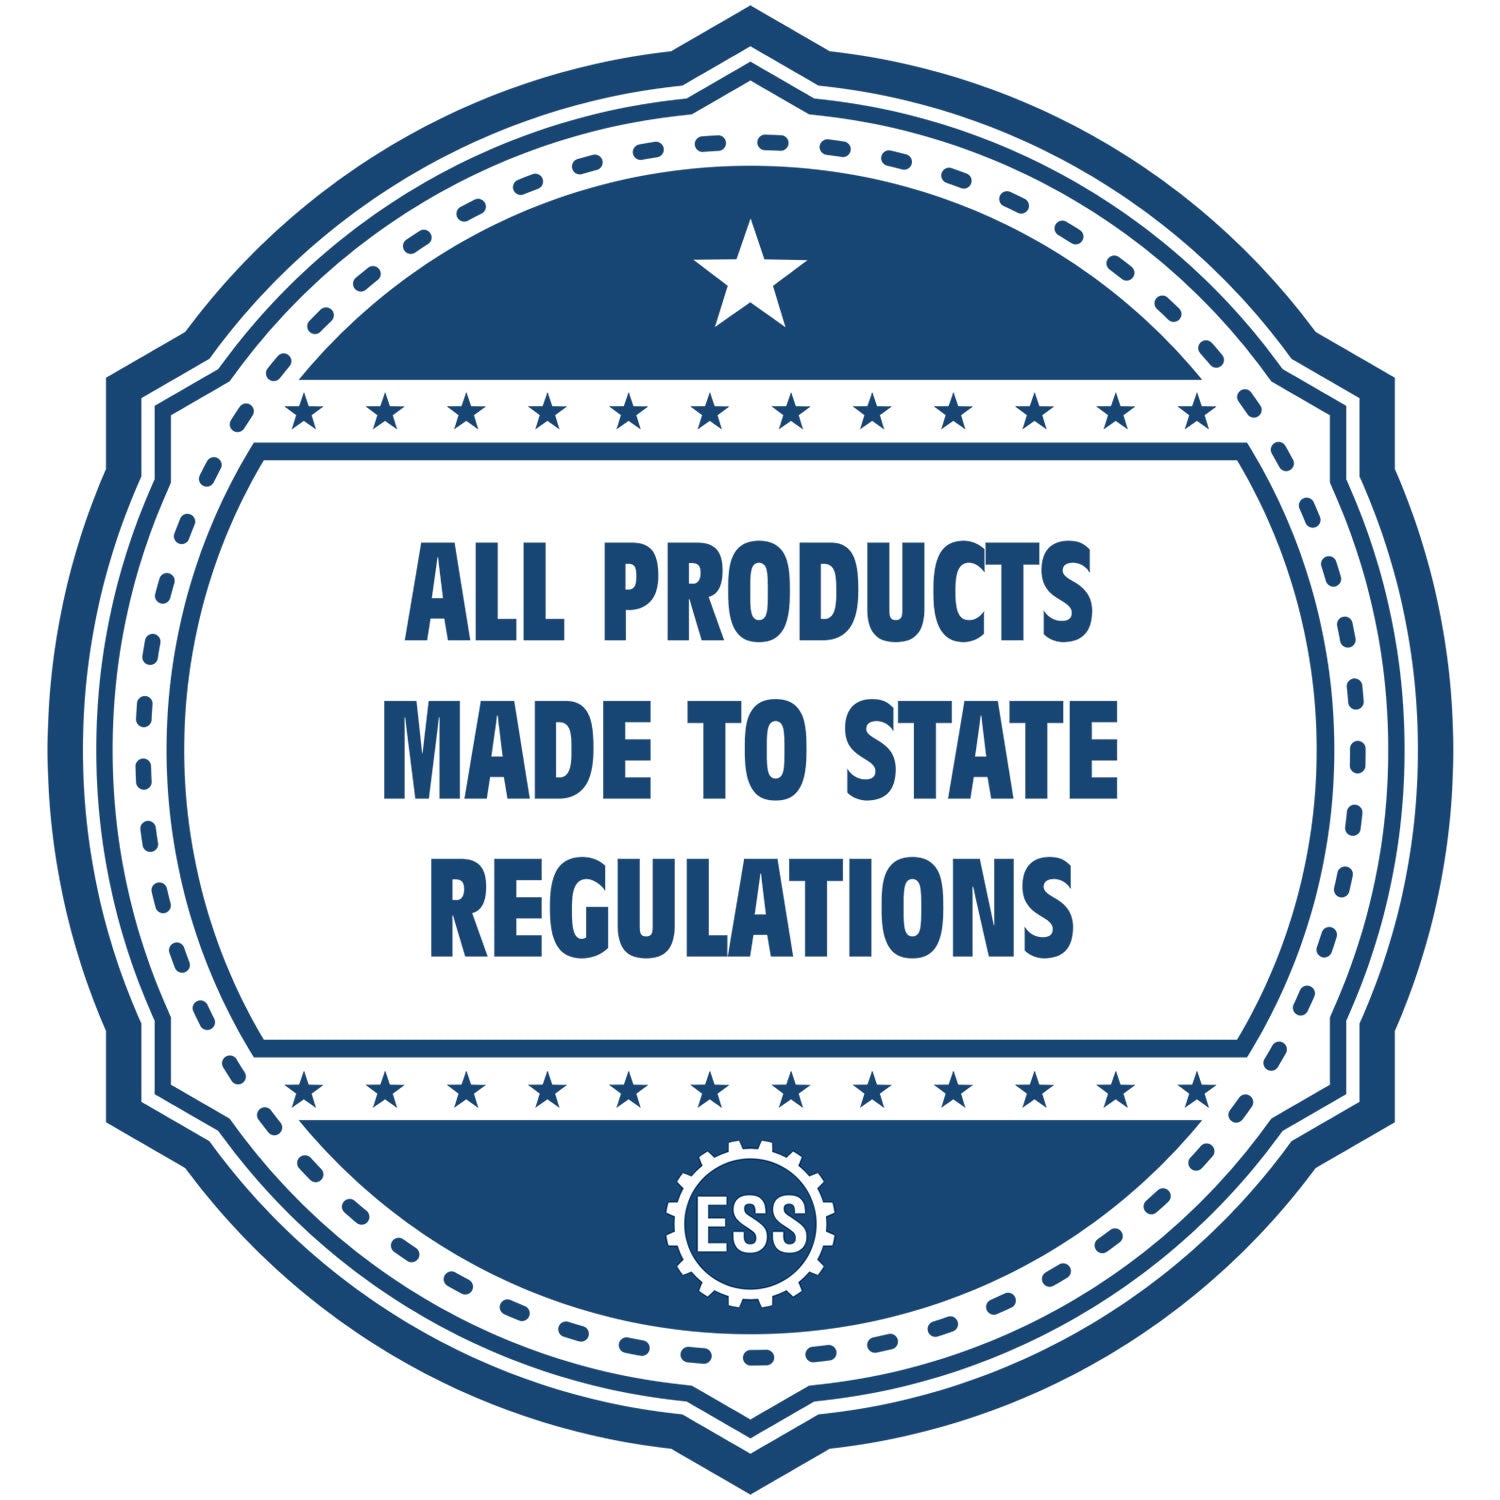 An icon or badge element for the State of North Carolina Long Reach Architectural Embossing Seal showing that this product is made in compliance with state regulations.